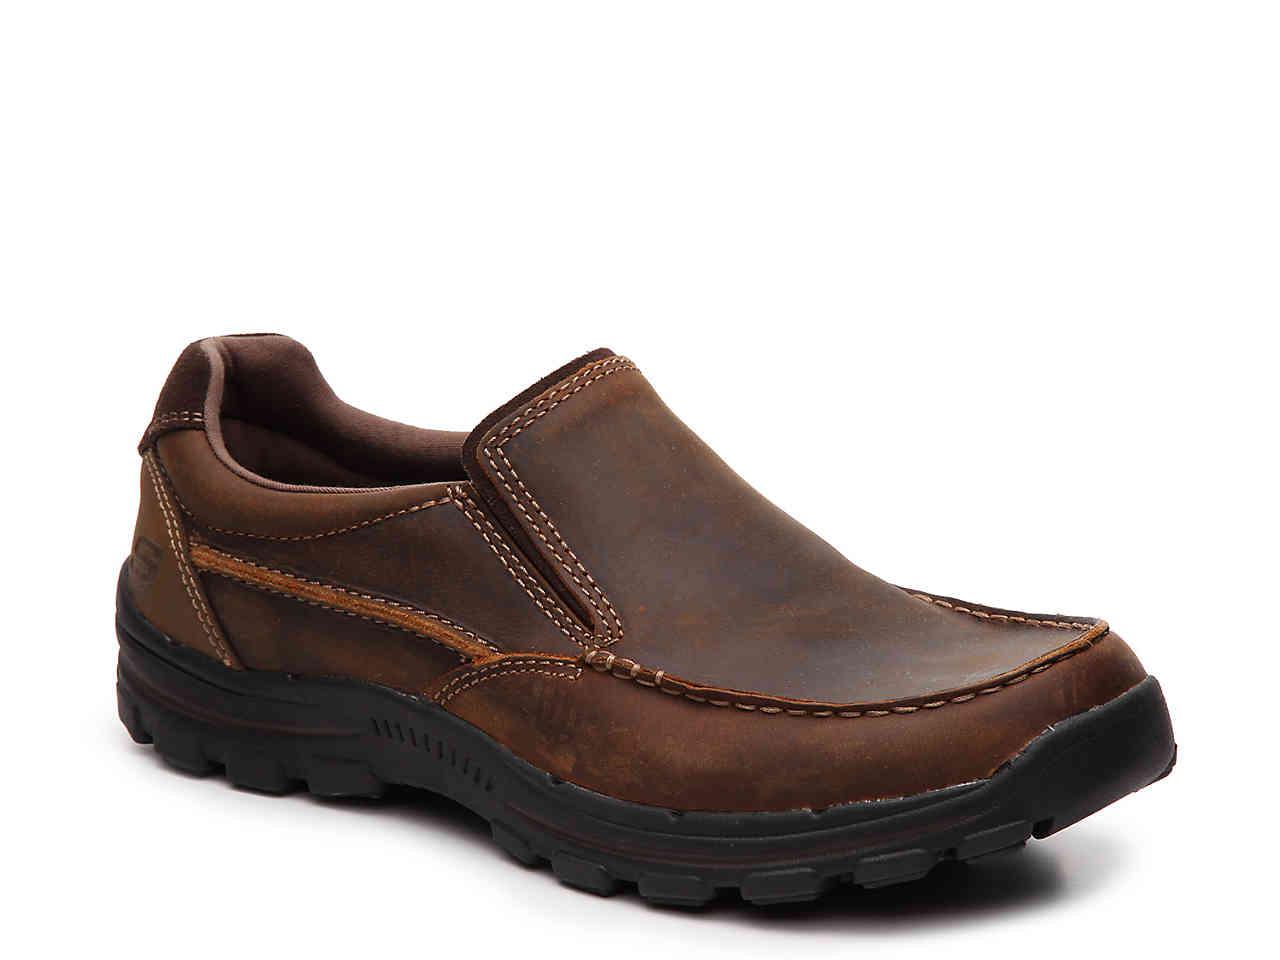 Skechers Leather Rayland Slip-on in Brown for Men - Lyst